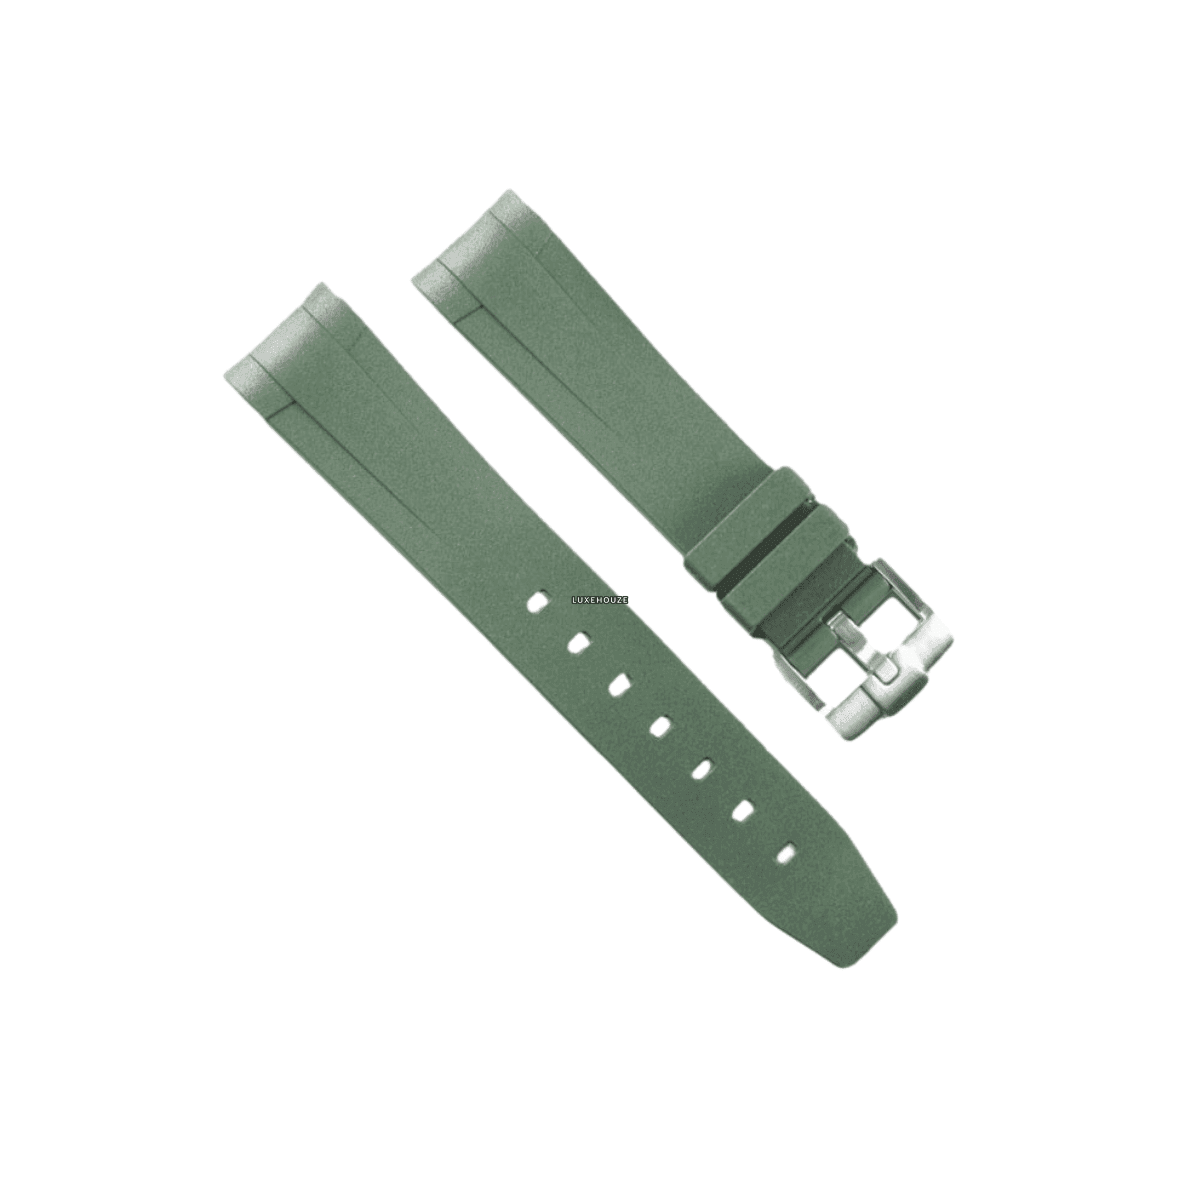 Black Bay 58 39mm Tang Buckle Series Watch Bands RUBBER B Military Green 